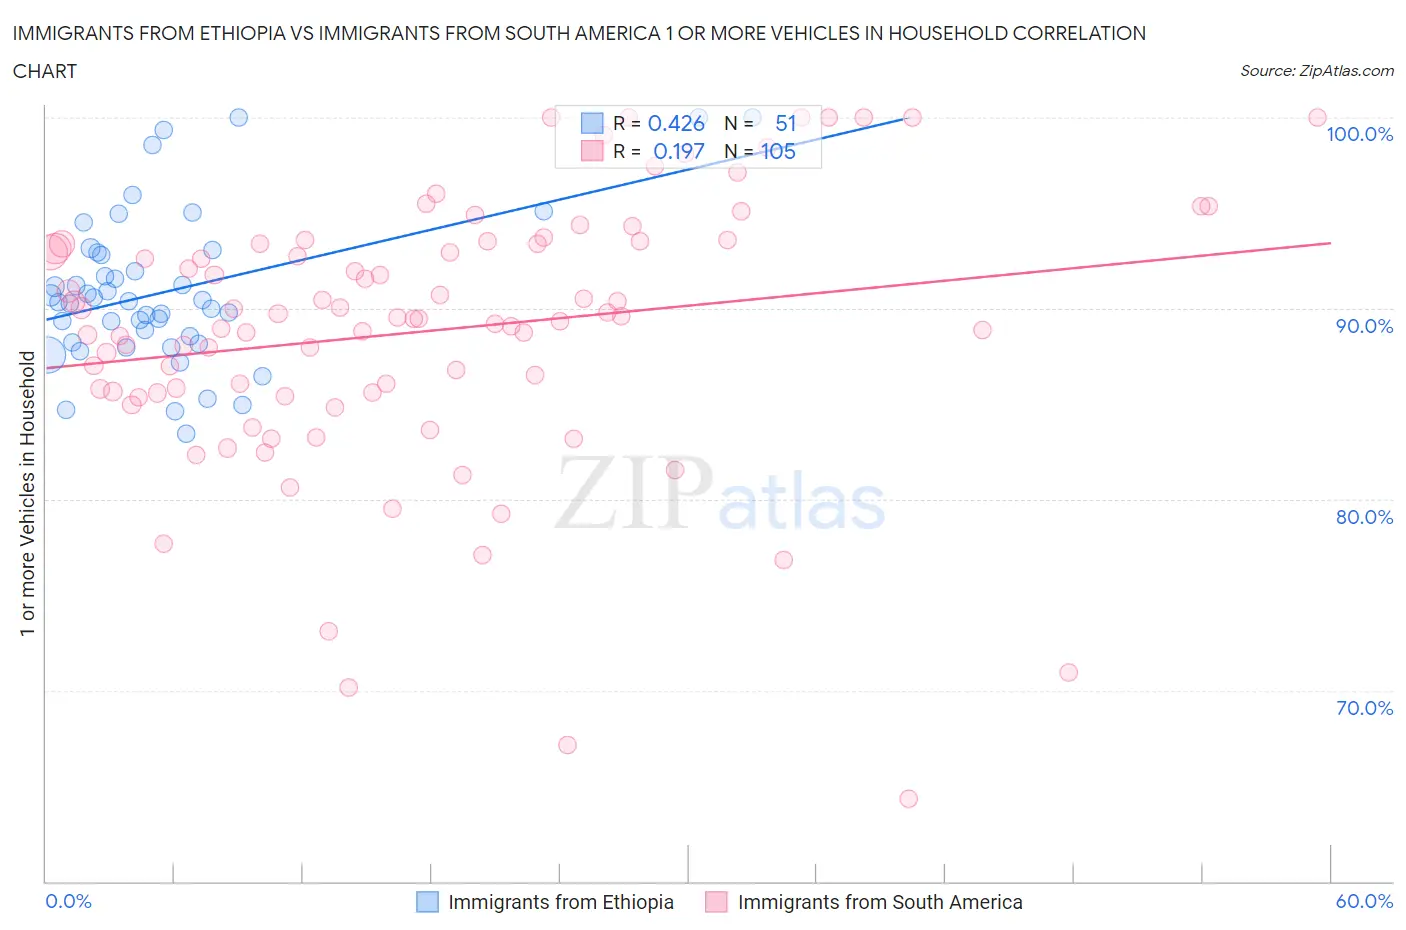 Immigrants from Ethiopia vs Immigrants from South America 1 or more Vehicles in Household